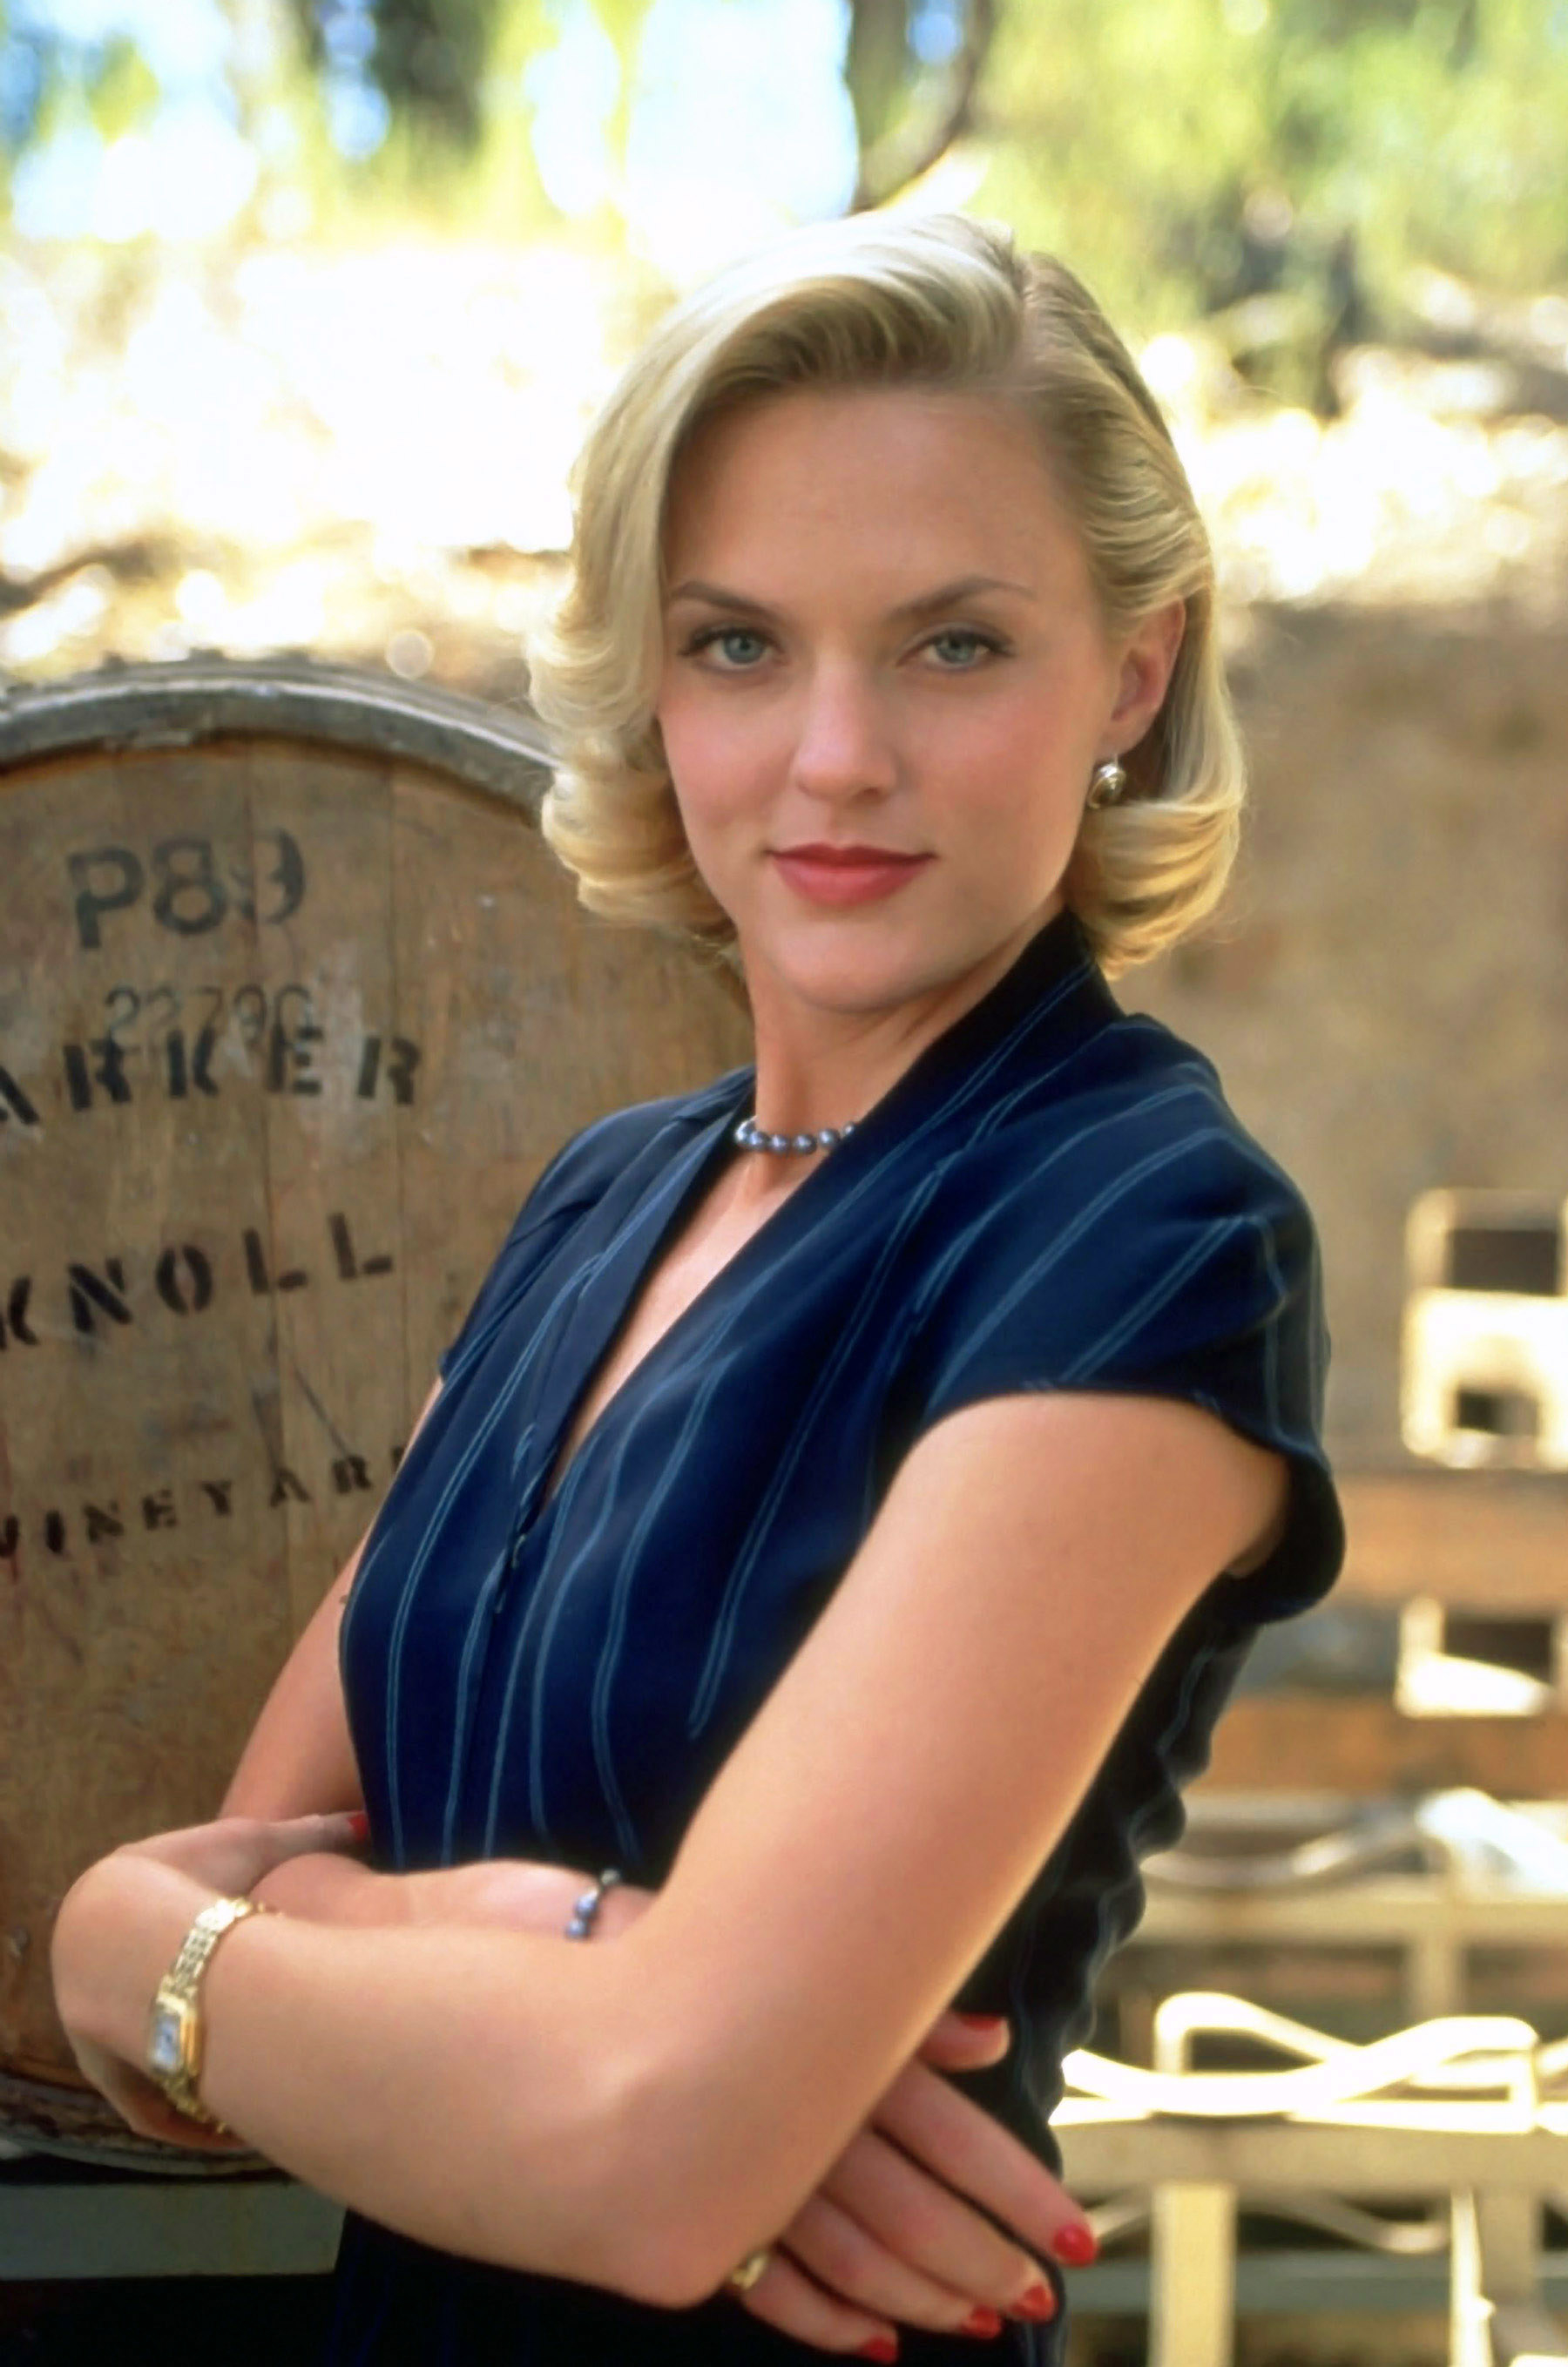 Elaine Hendrix poses as Meredith Blake on set of &quot;The Parent Trap,&quot; in 1998